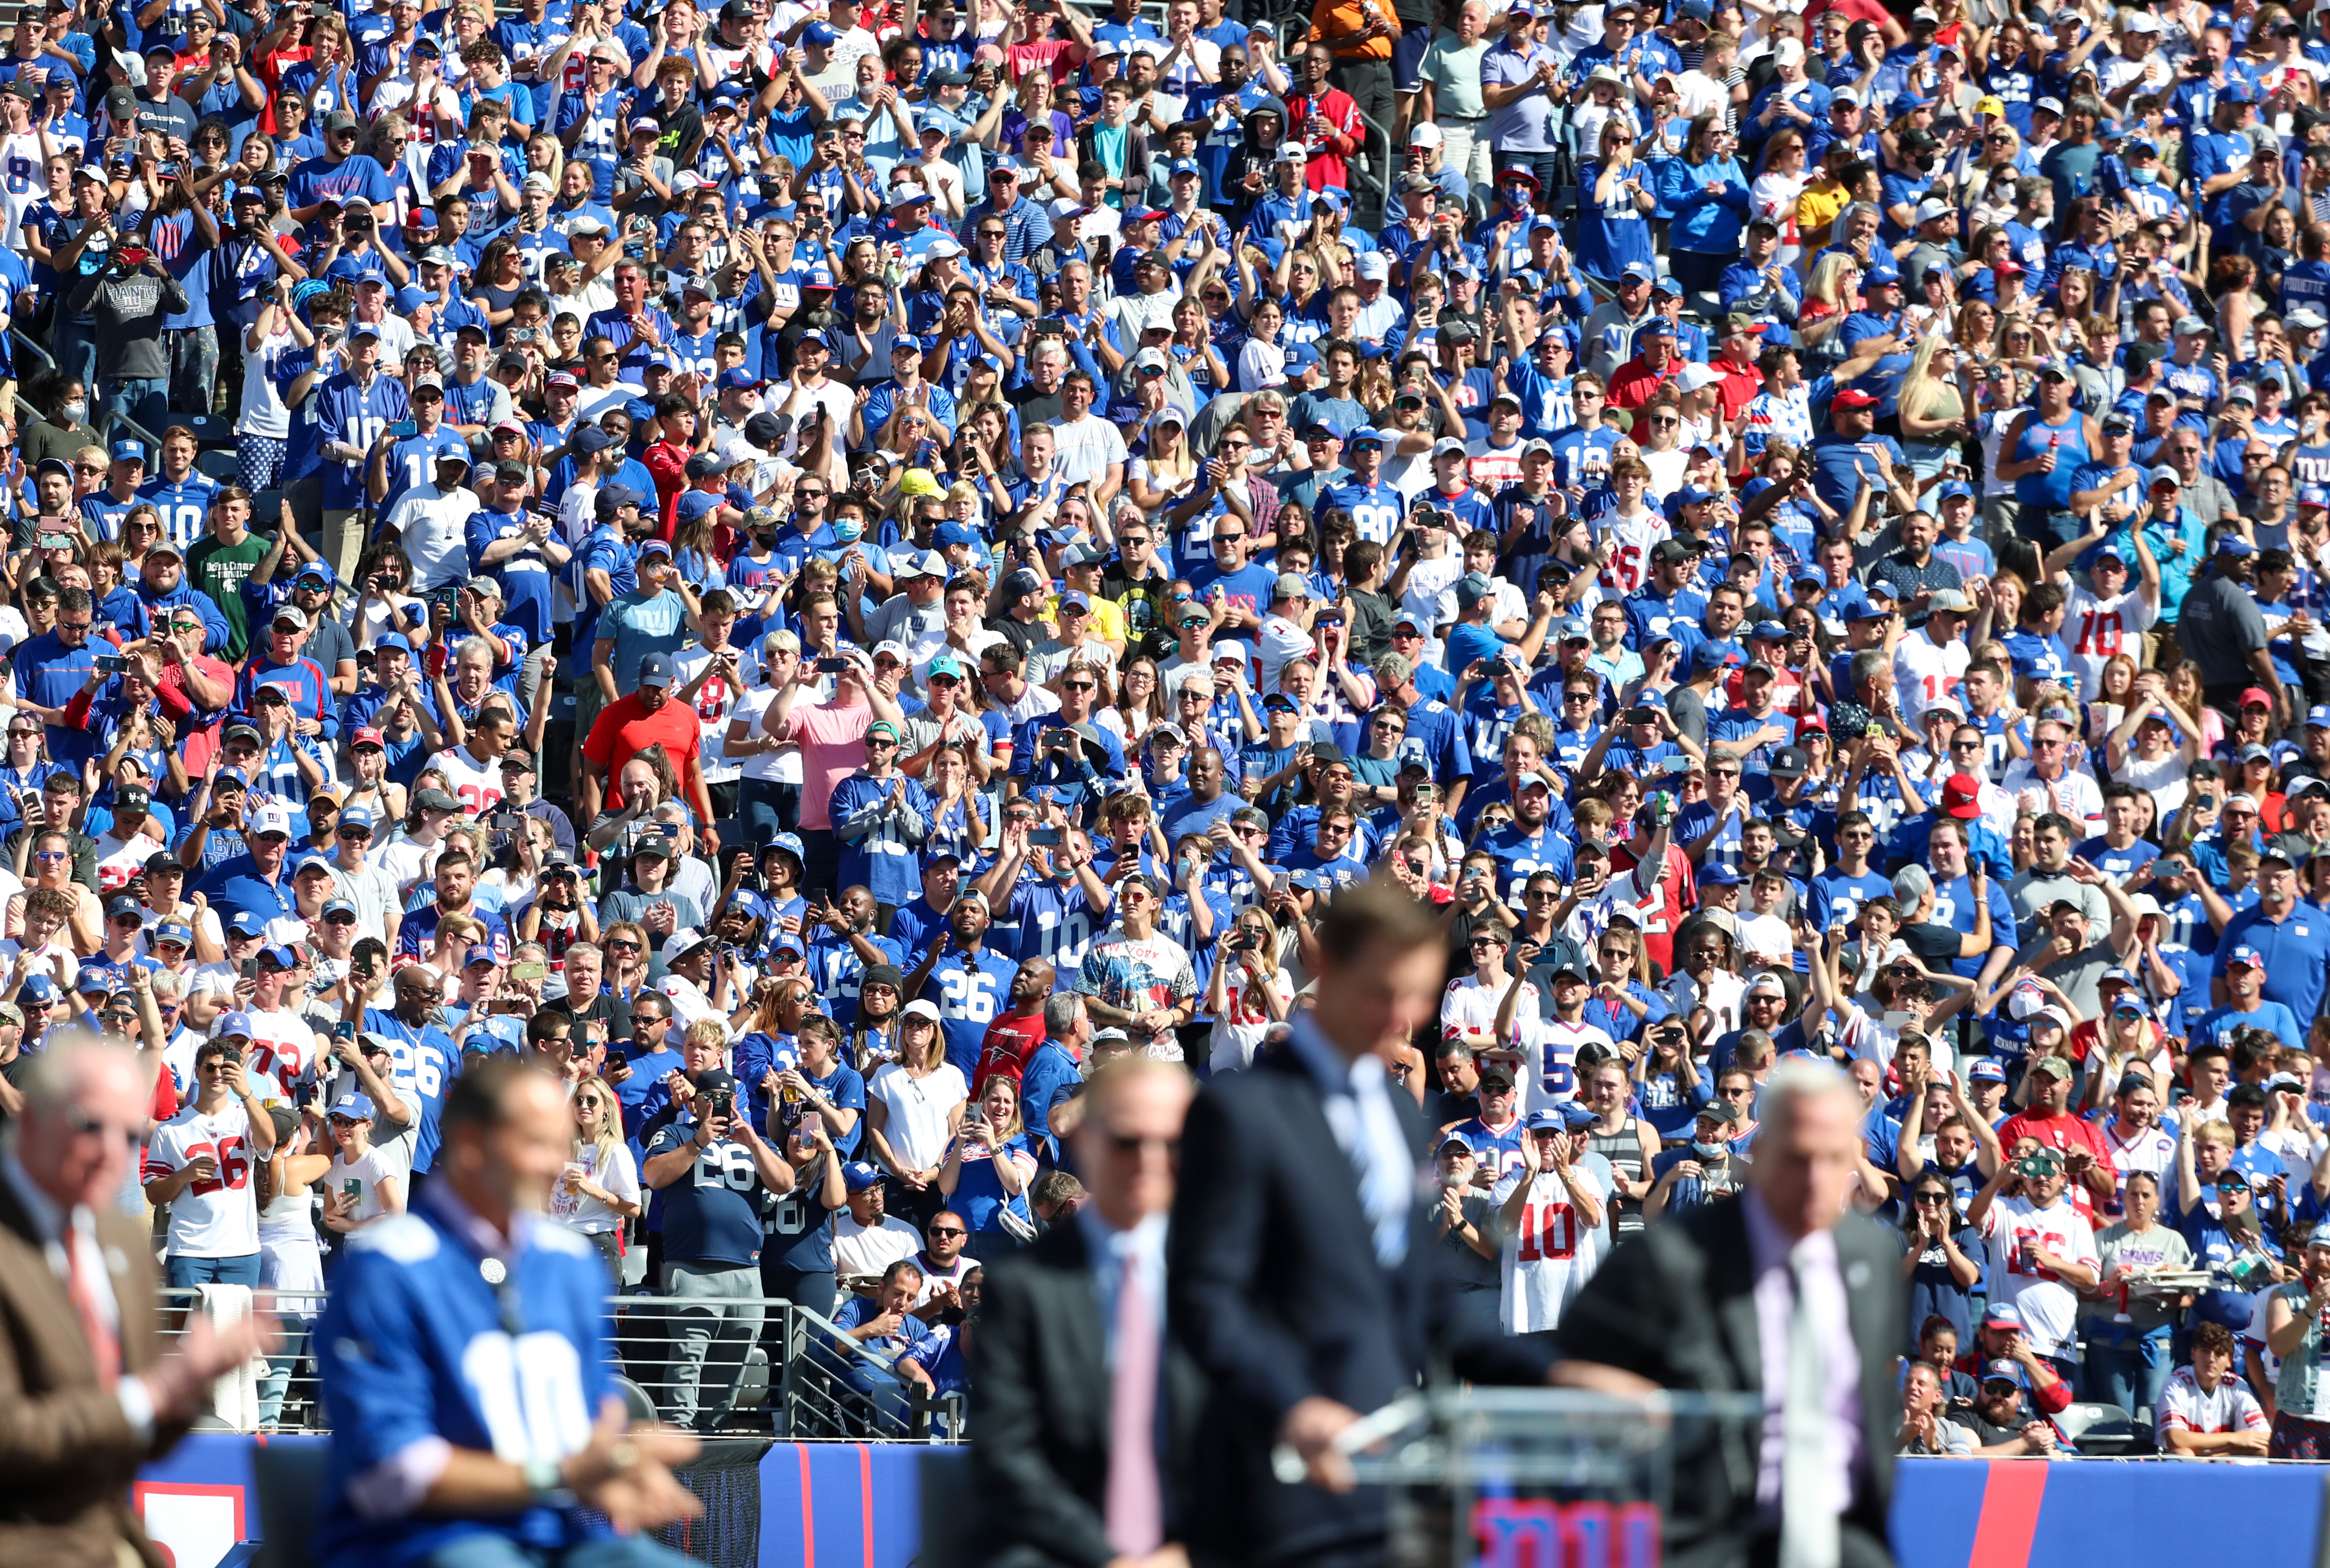 Giants retire Eli Manning's No. 10 jersey during halftime Ring of Honor  ceremony - Newsday